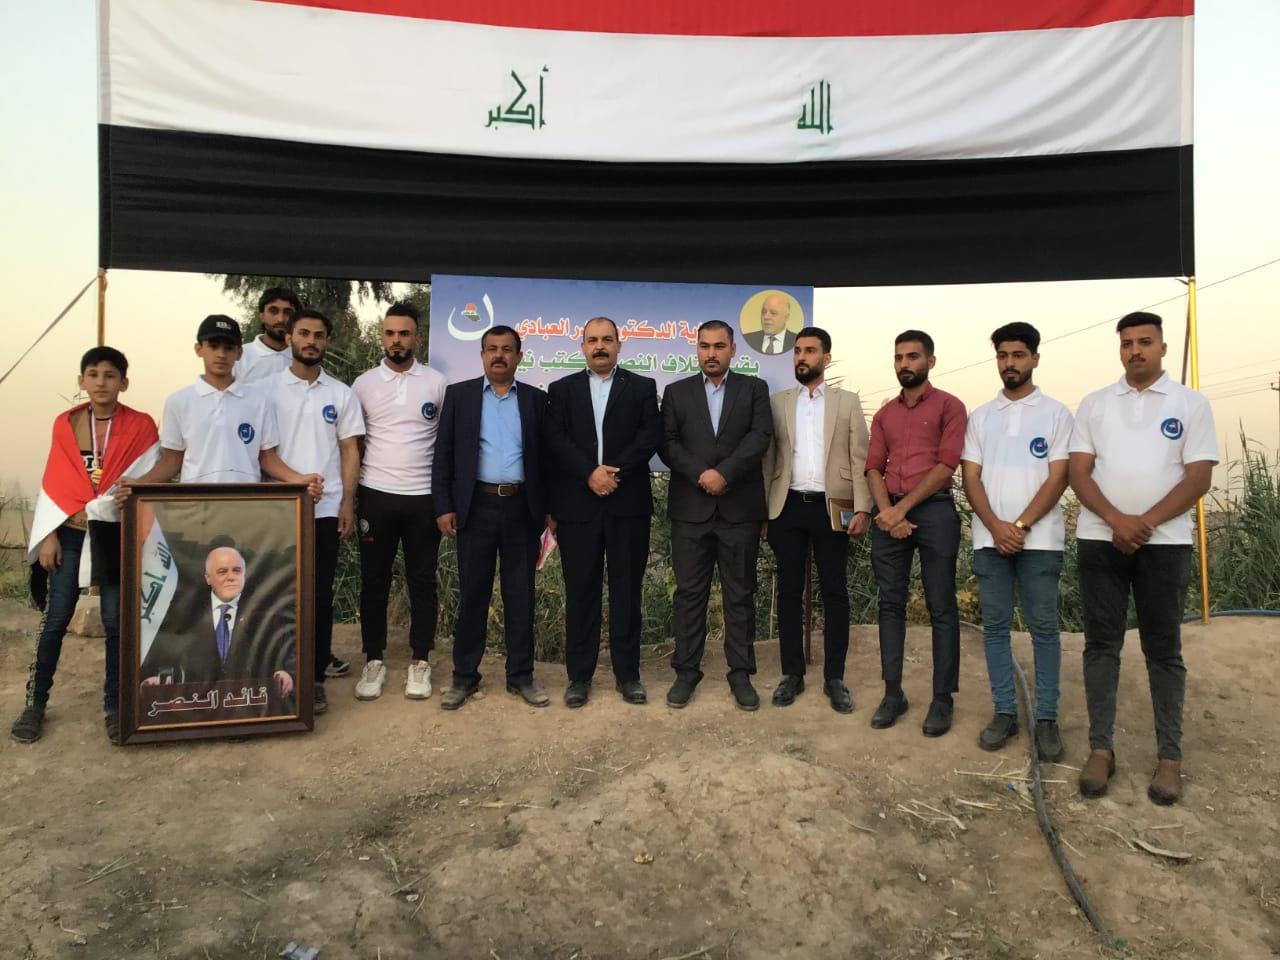 Under the patronage of Dr. Haider Al-Abadi...   A football league on the occasion of the anniversary of the liberation of Mosul concludes